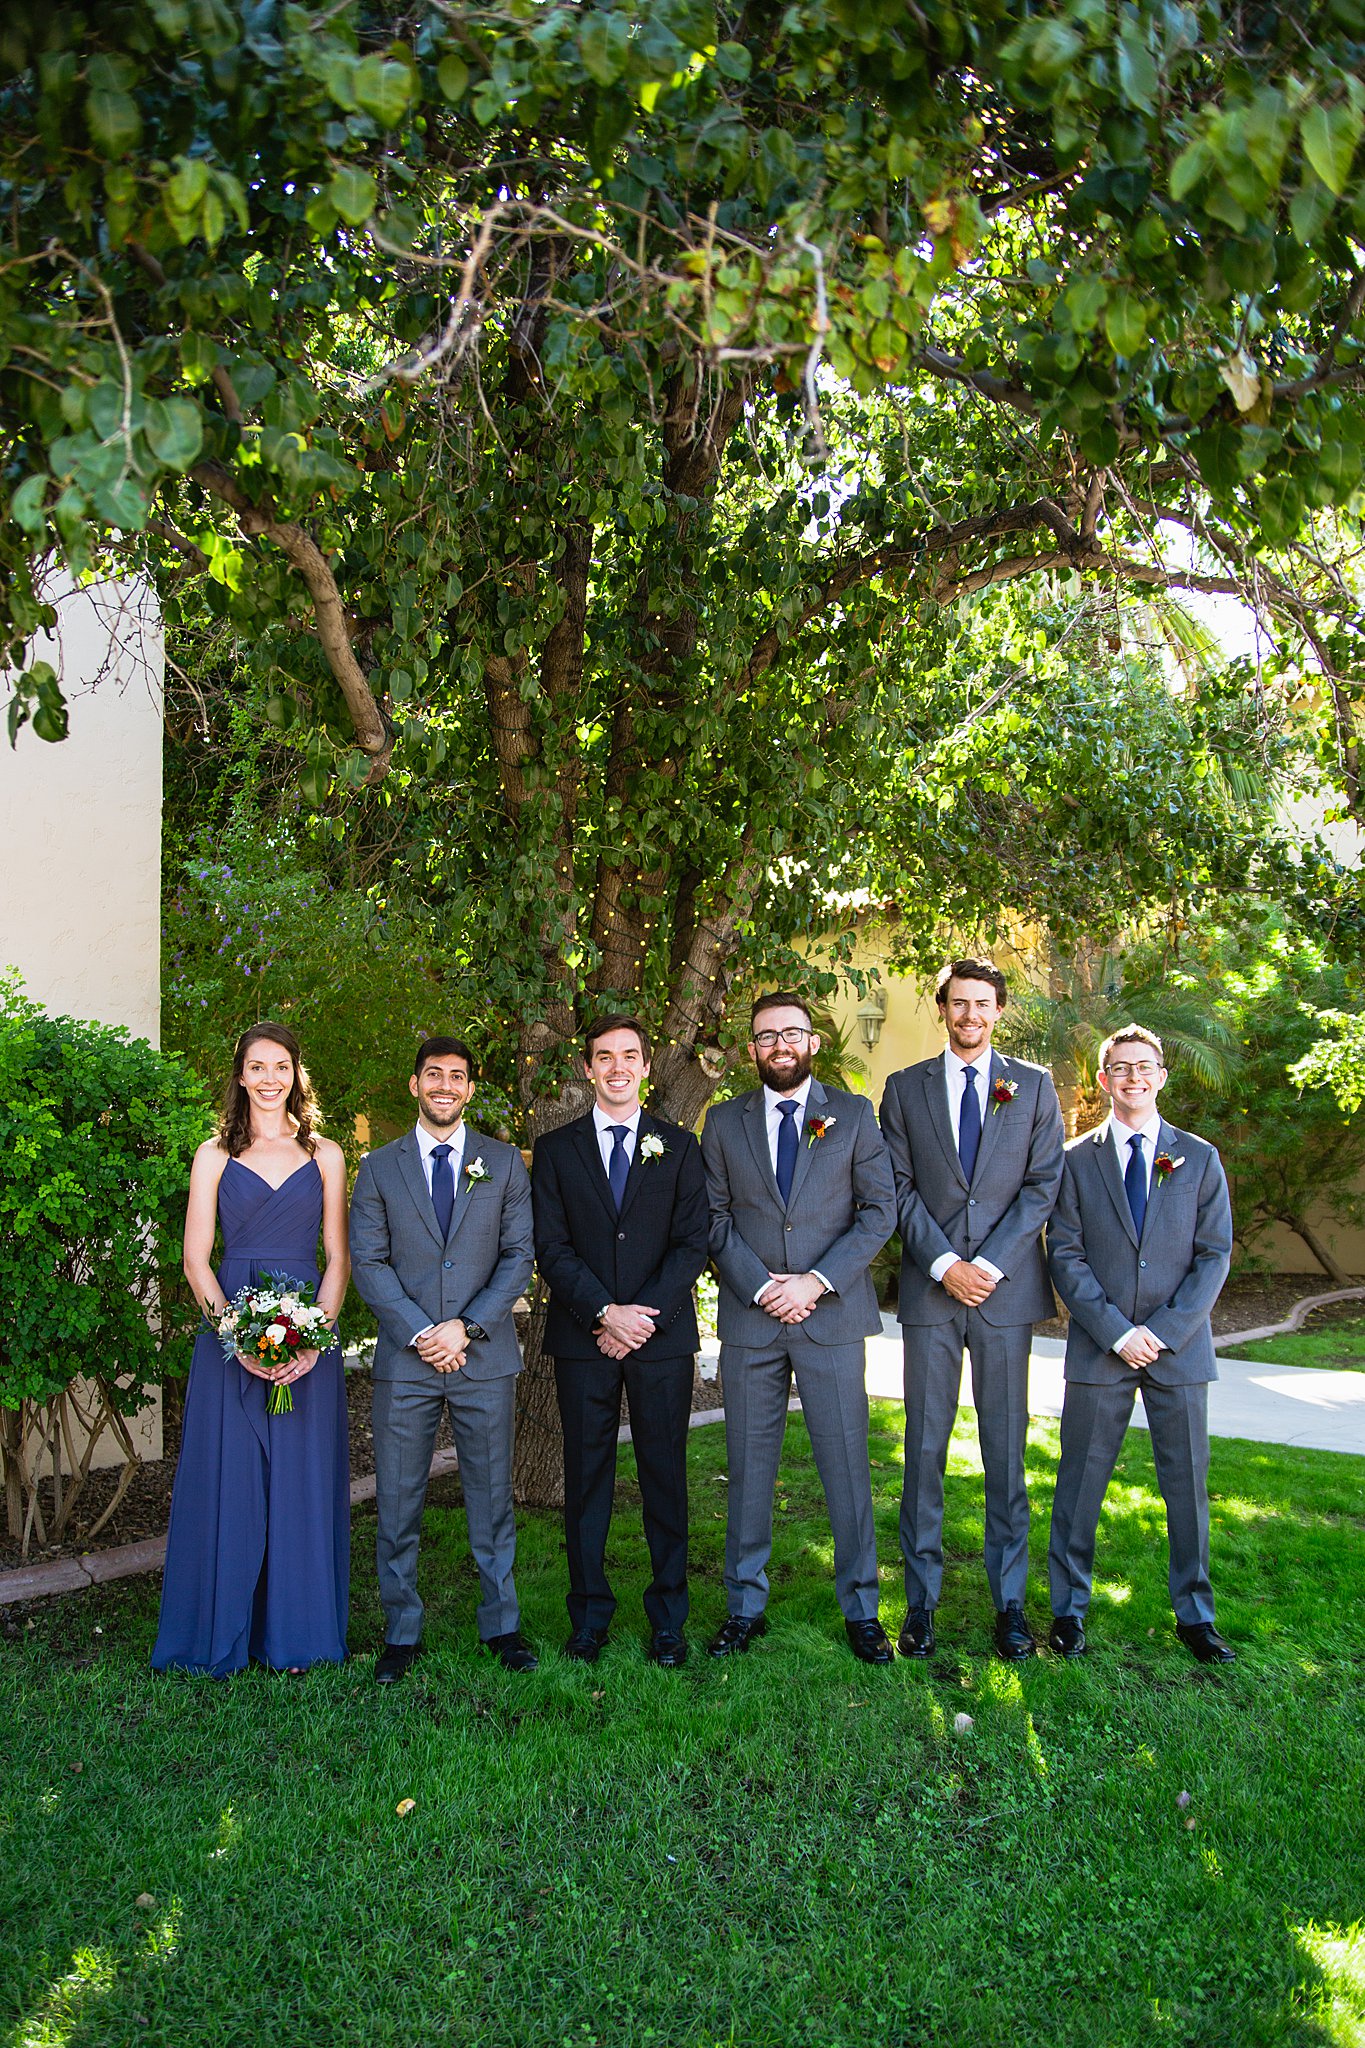 Groom and mixed gender bridal party together at a Secret Garden Events wedding by Arizona wedding photographer PMA Photography.